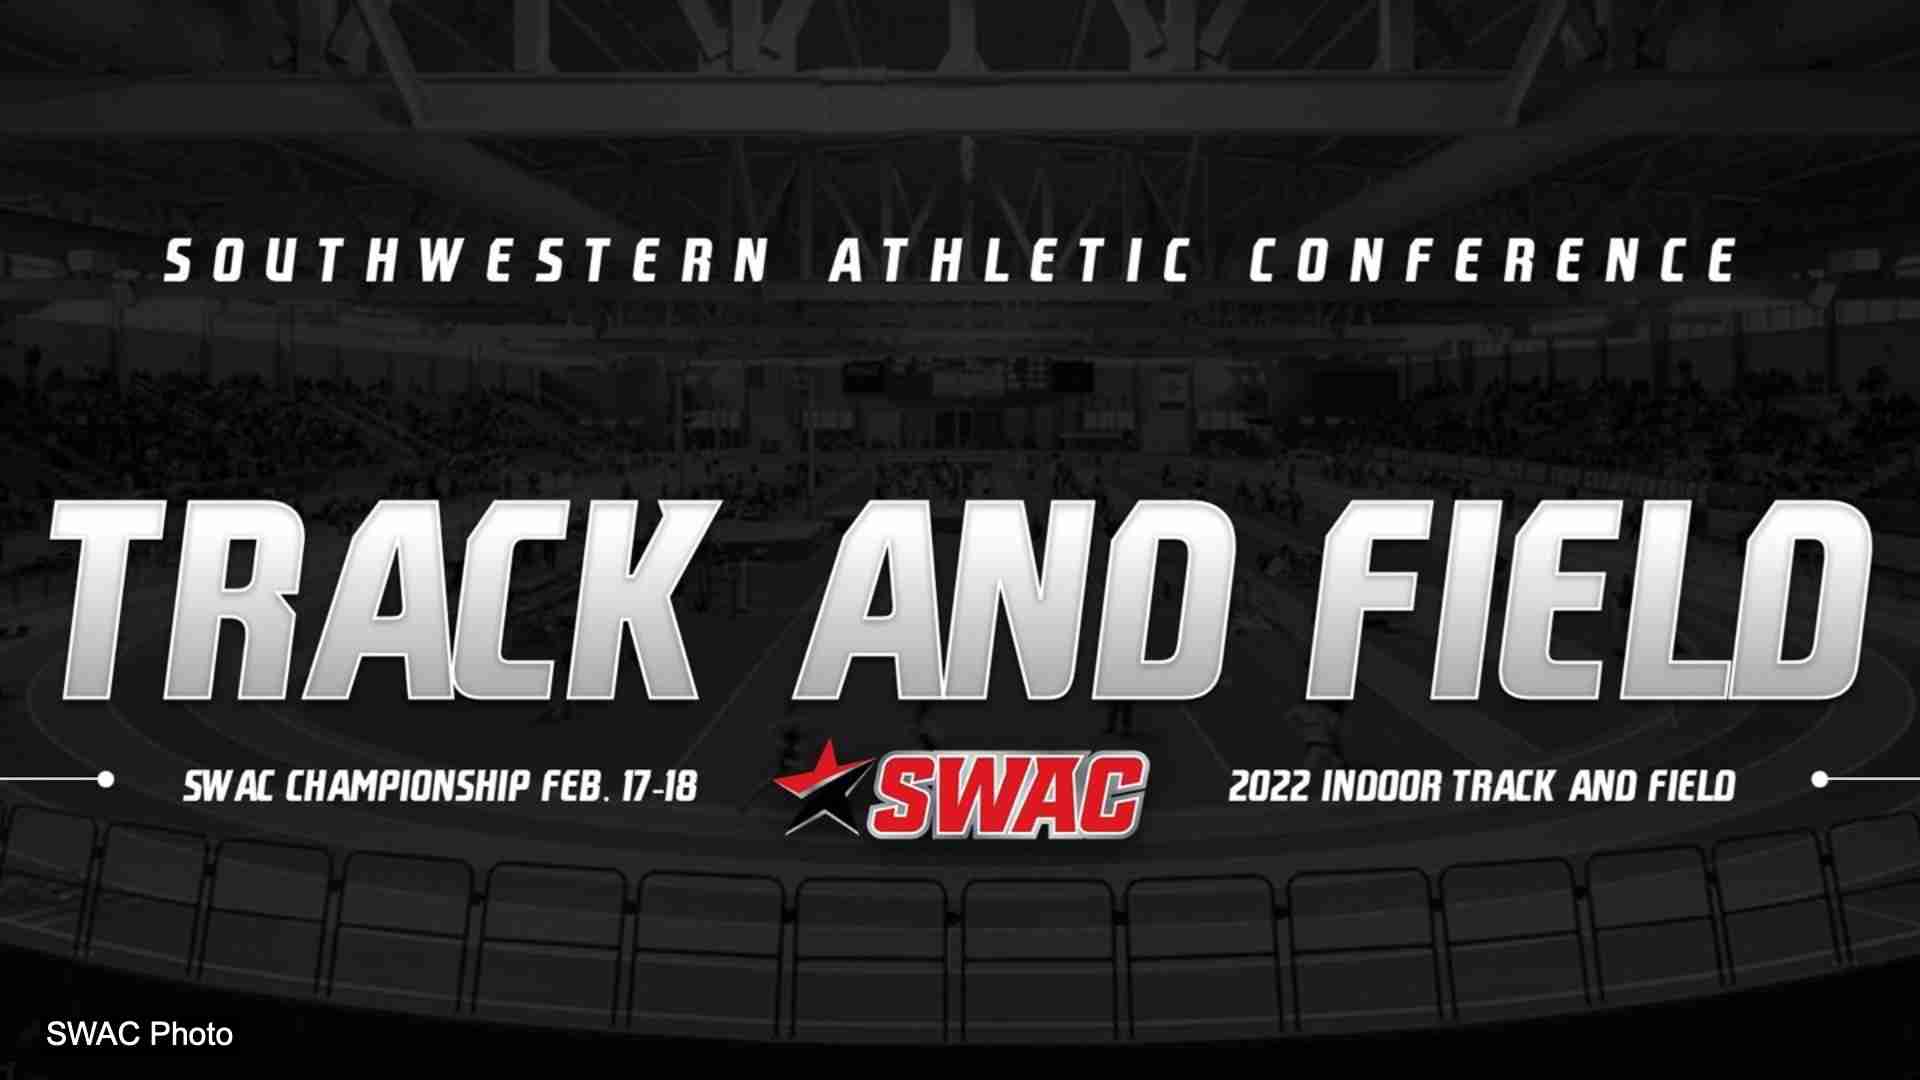 How to watch the 2022 SWAC Indoor Track and Field Championships?